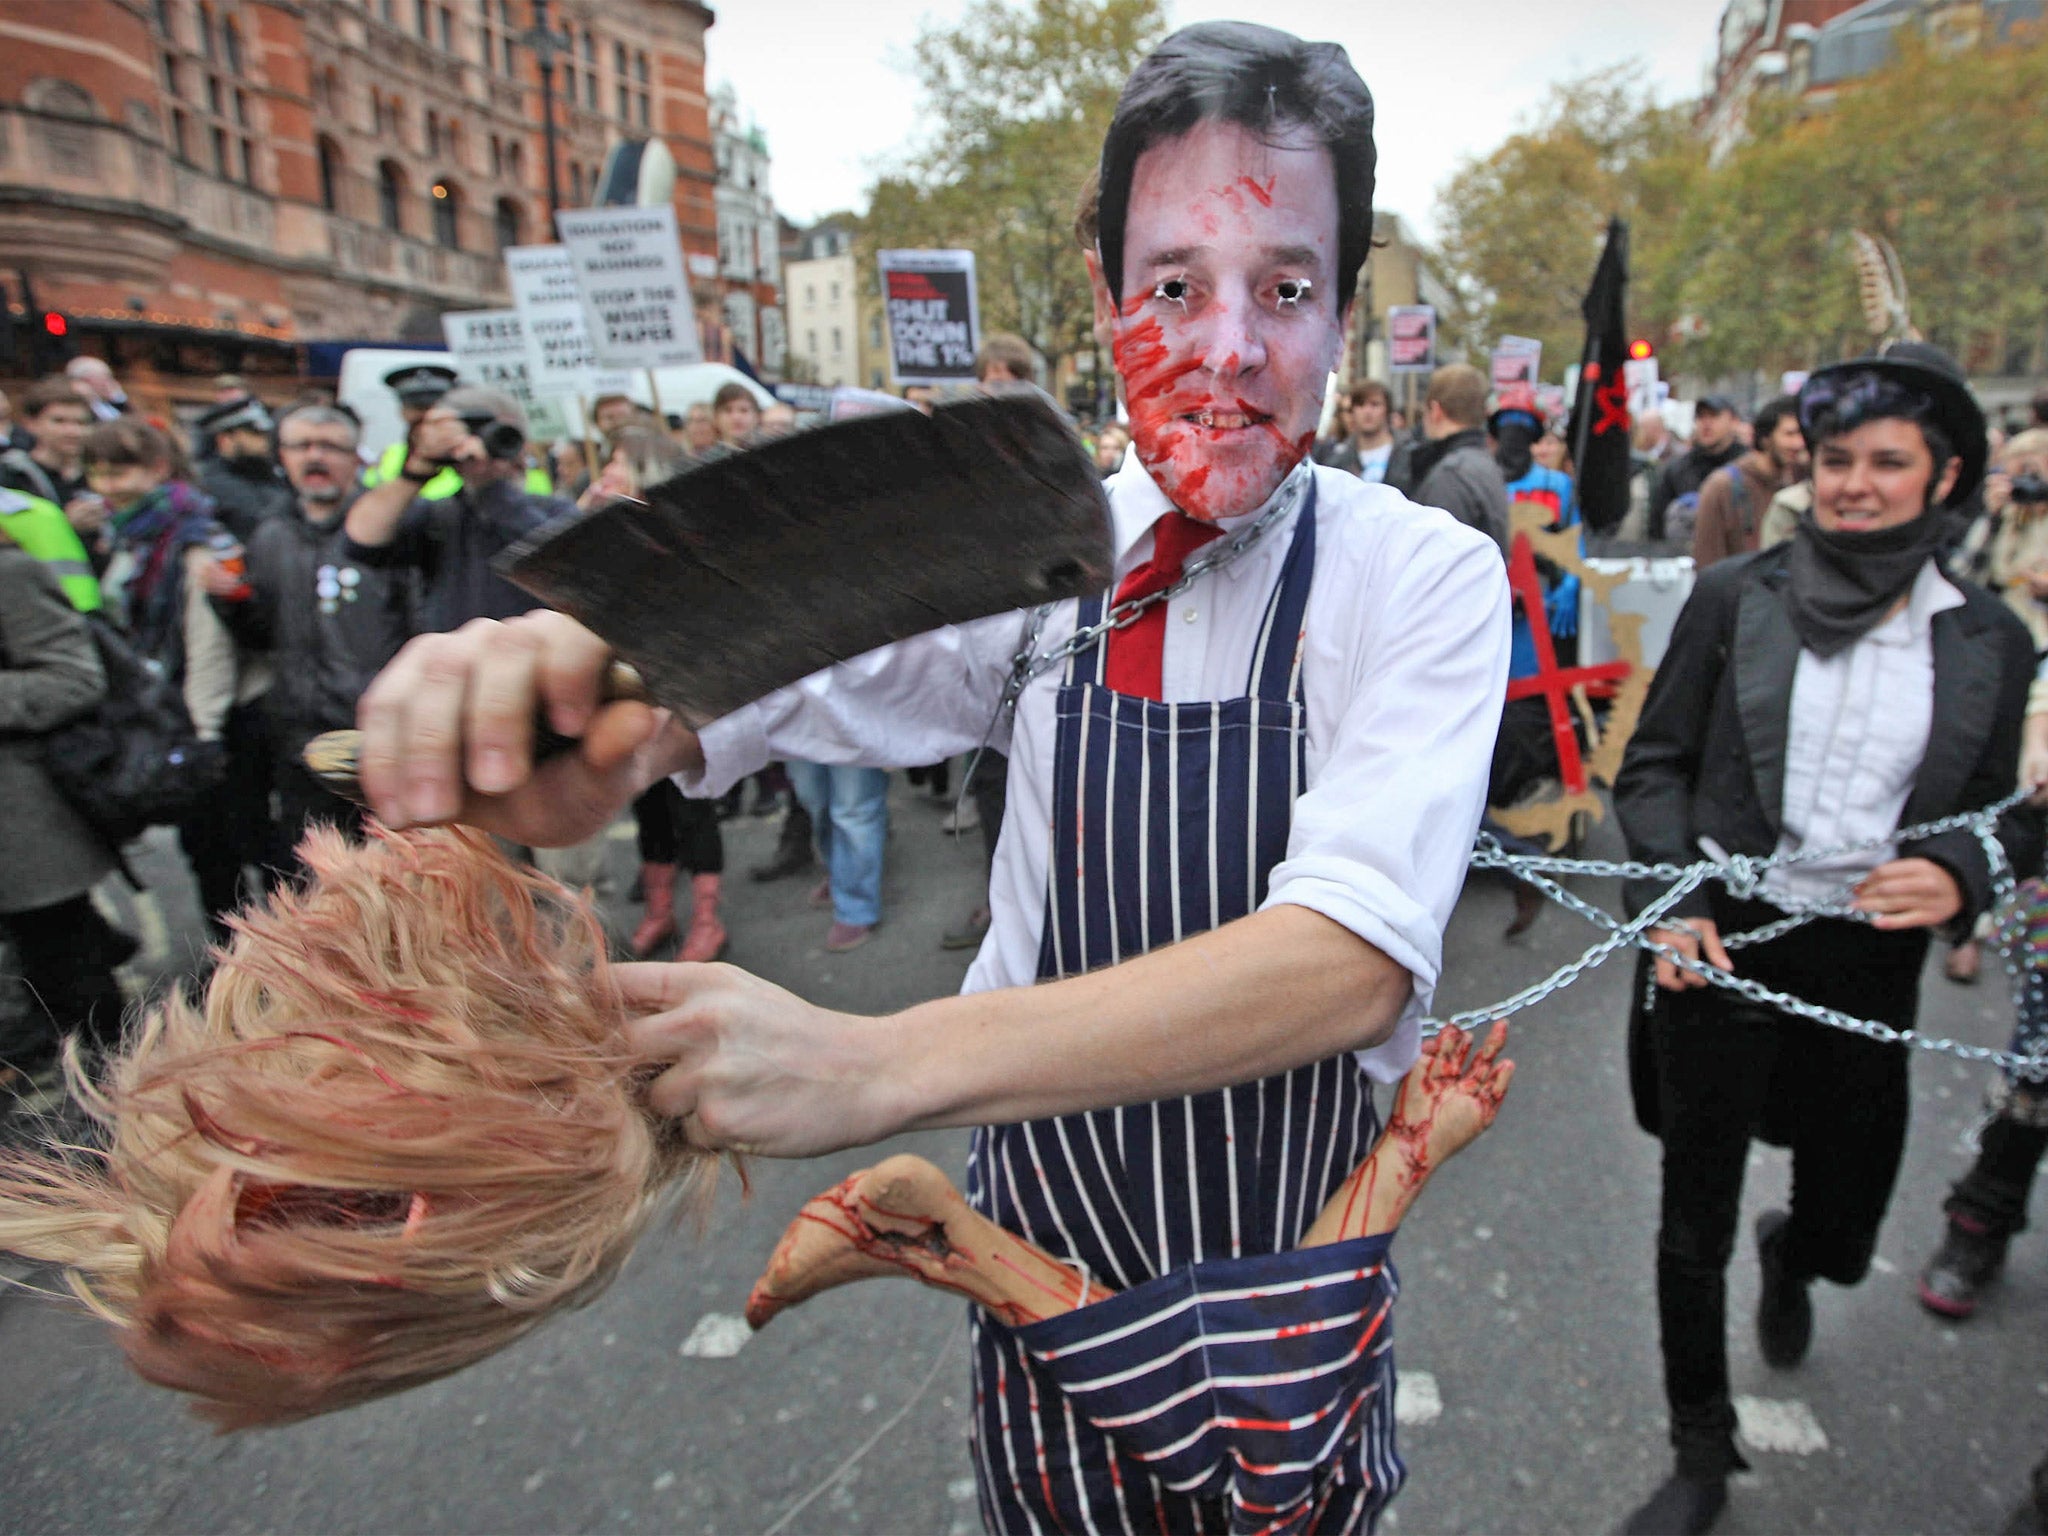 A student in a Nick Clegg mask protests against higher tuition fees in London in 2011